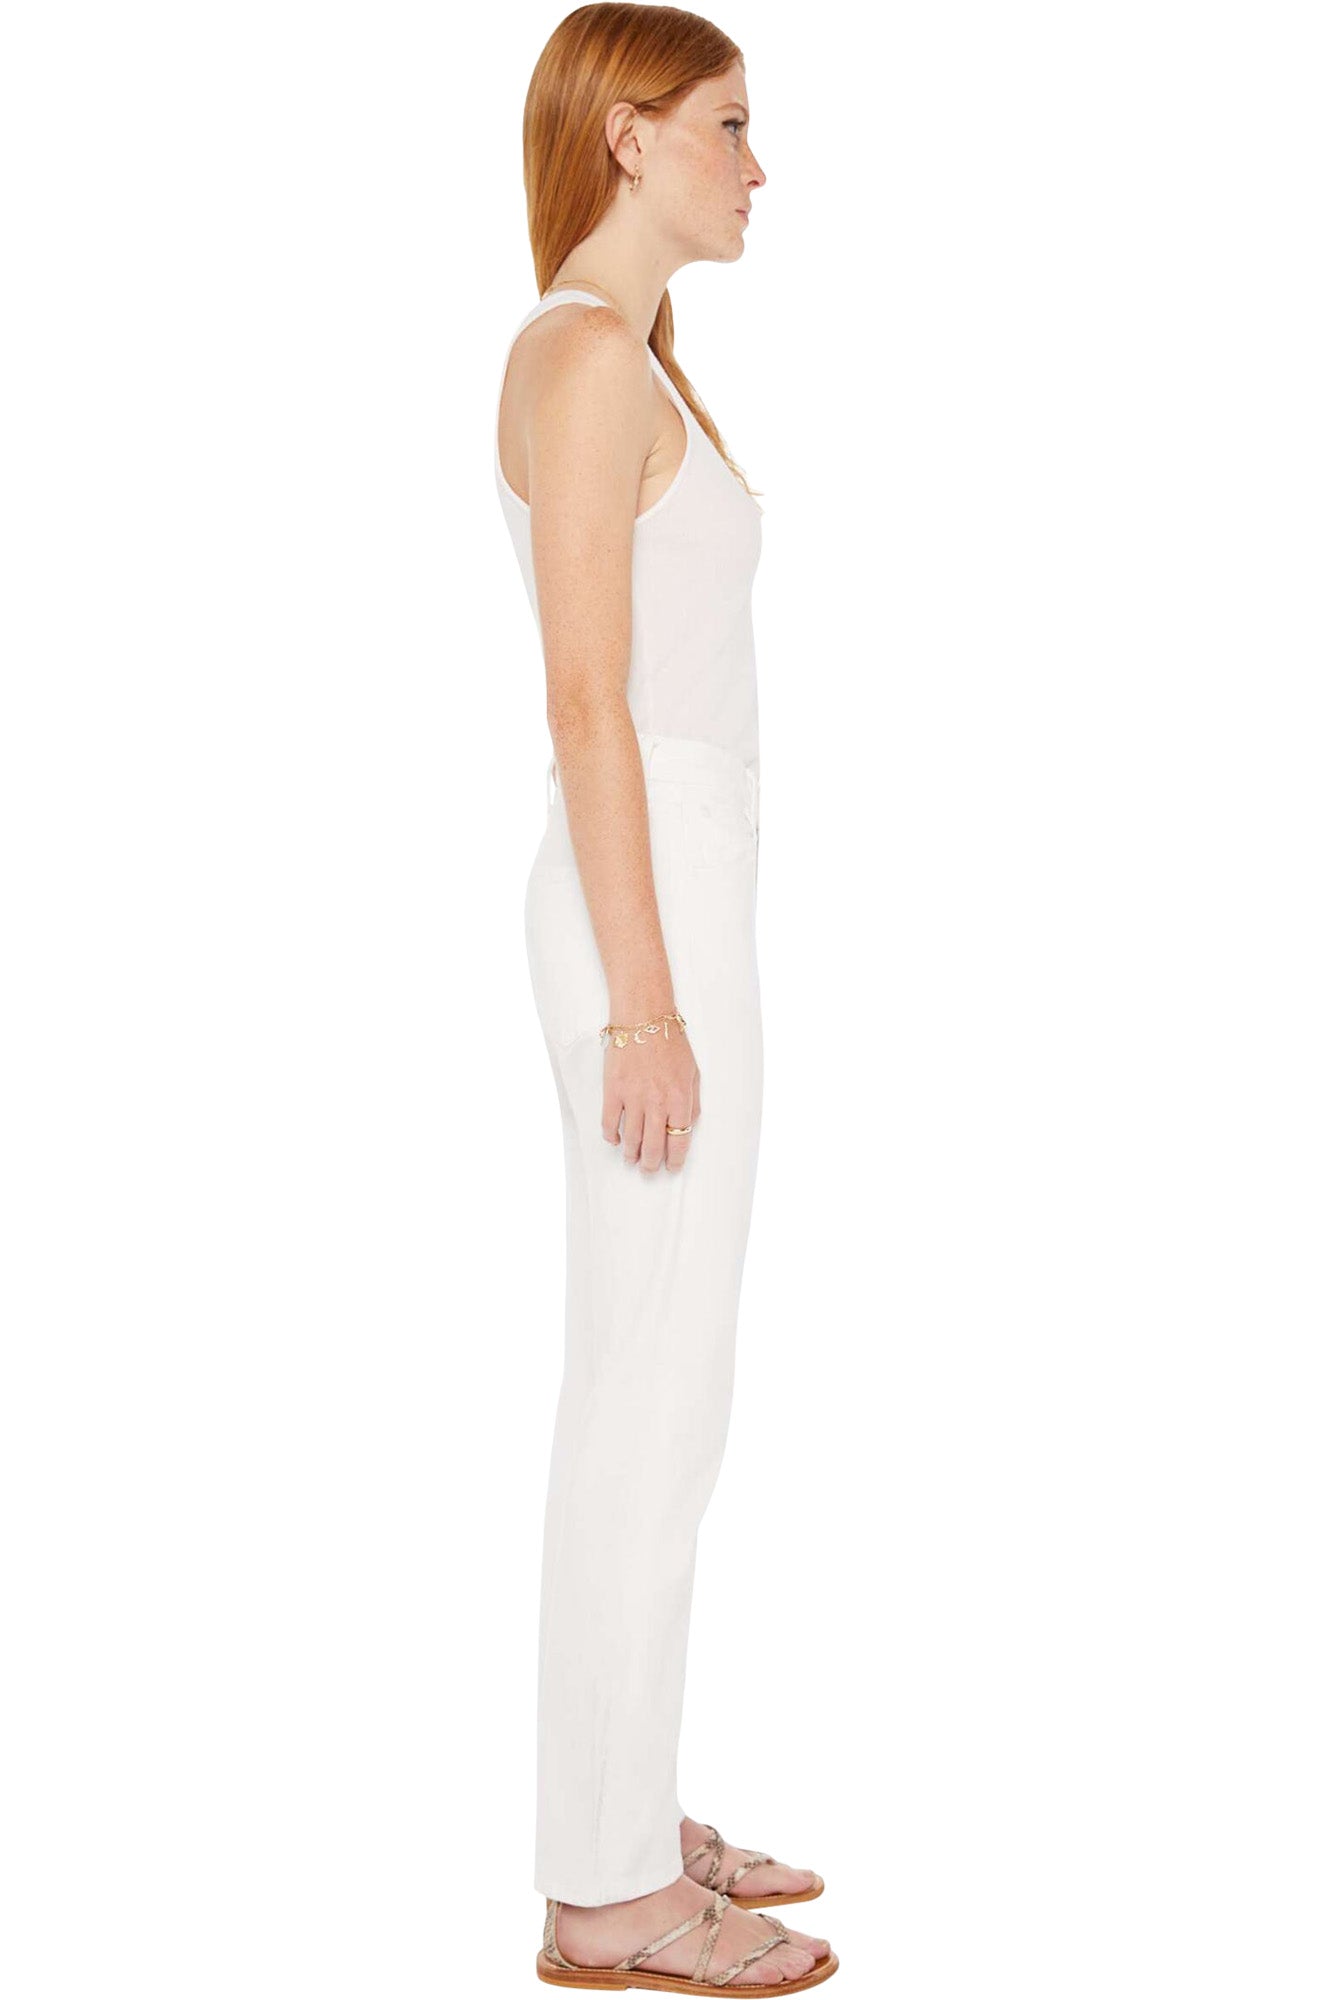 Stylish Denim Jumpsuit with High Rise - Perfect for the After Party!